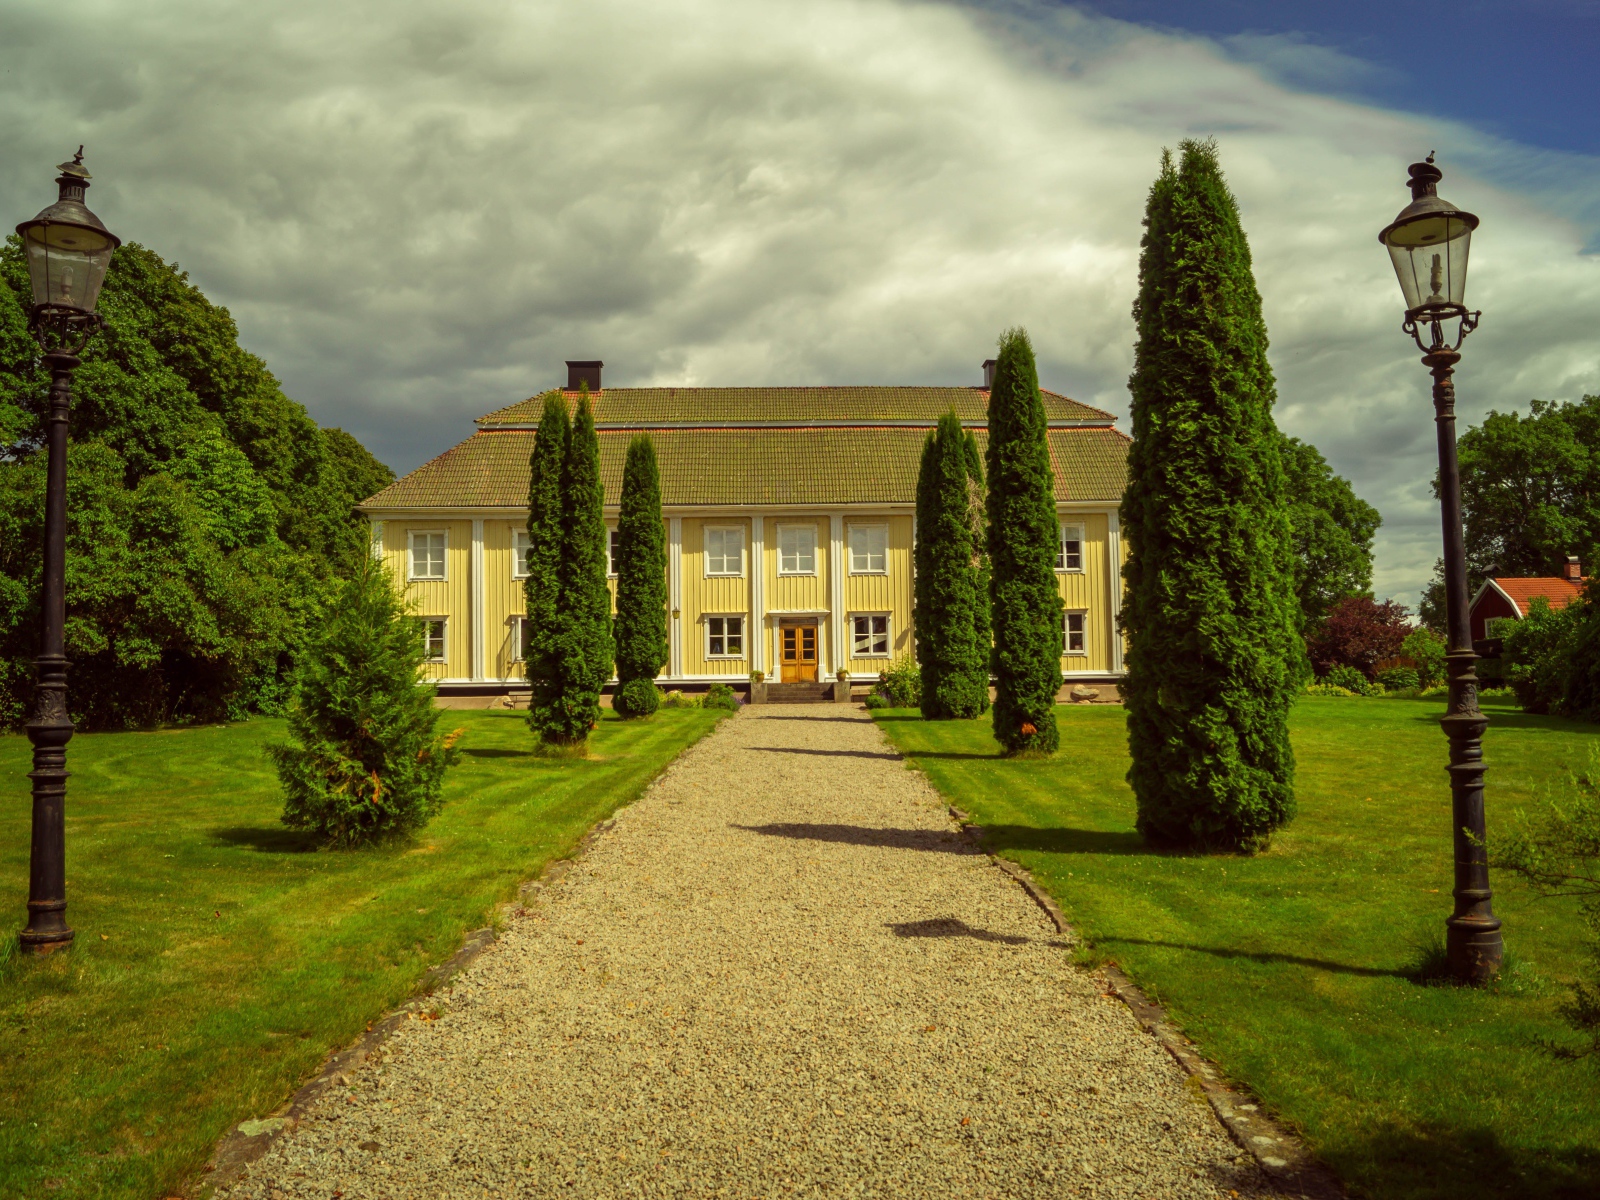 Manor with bushes in Sweden